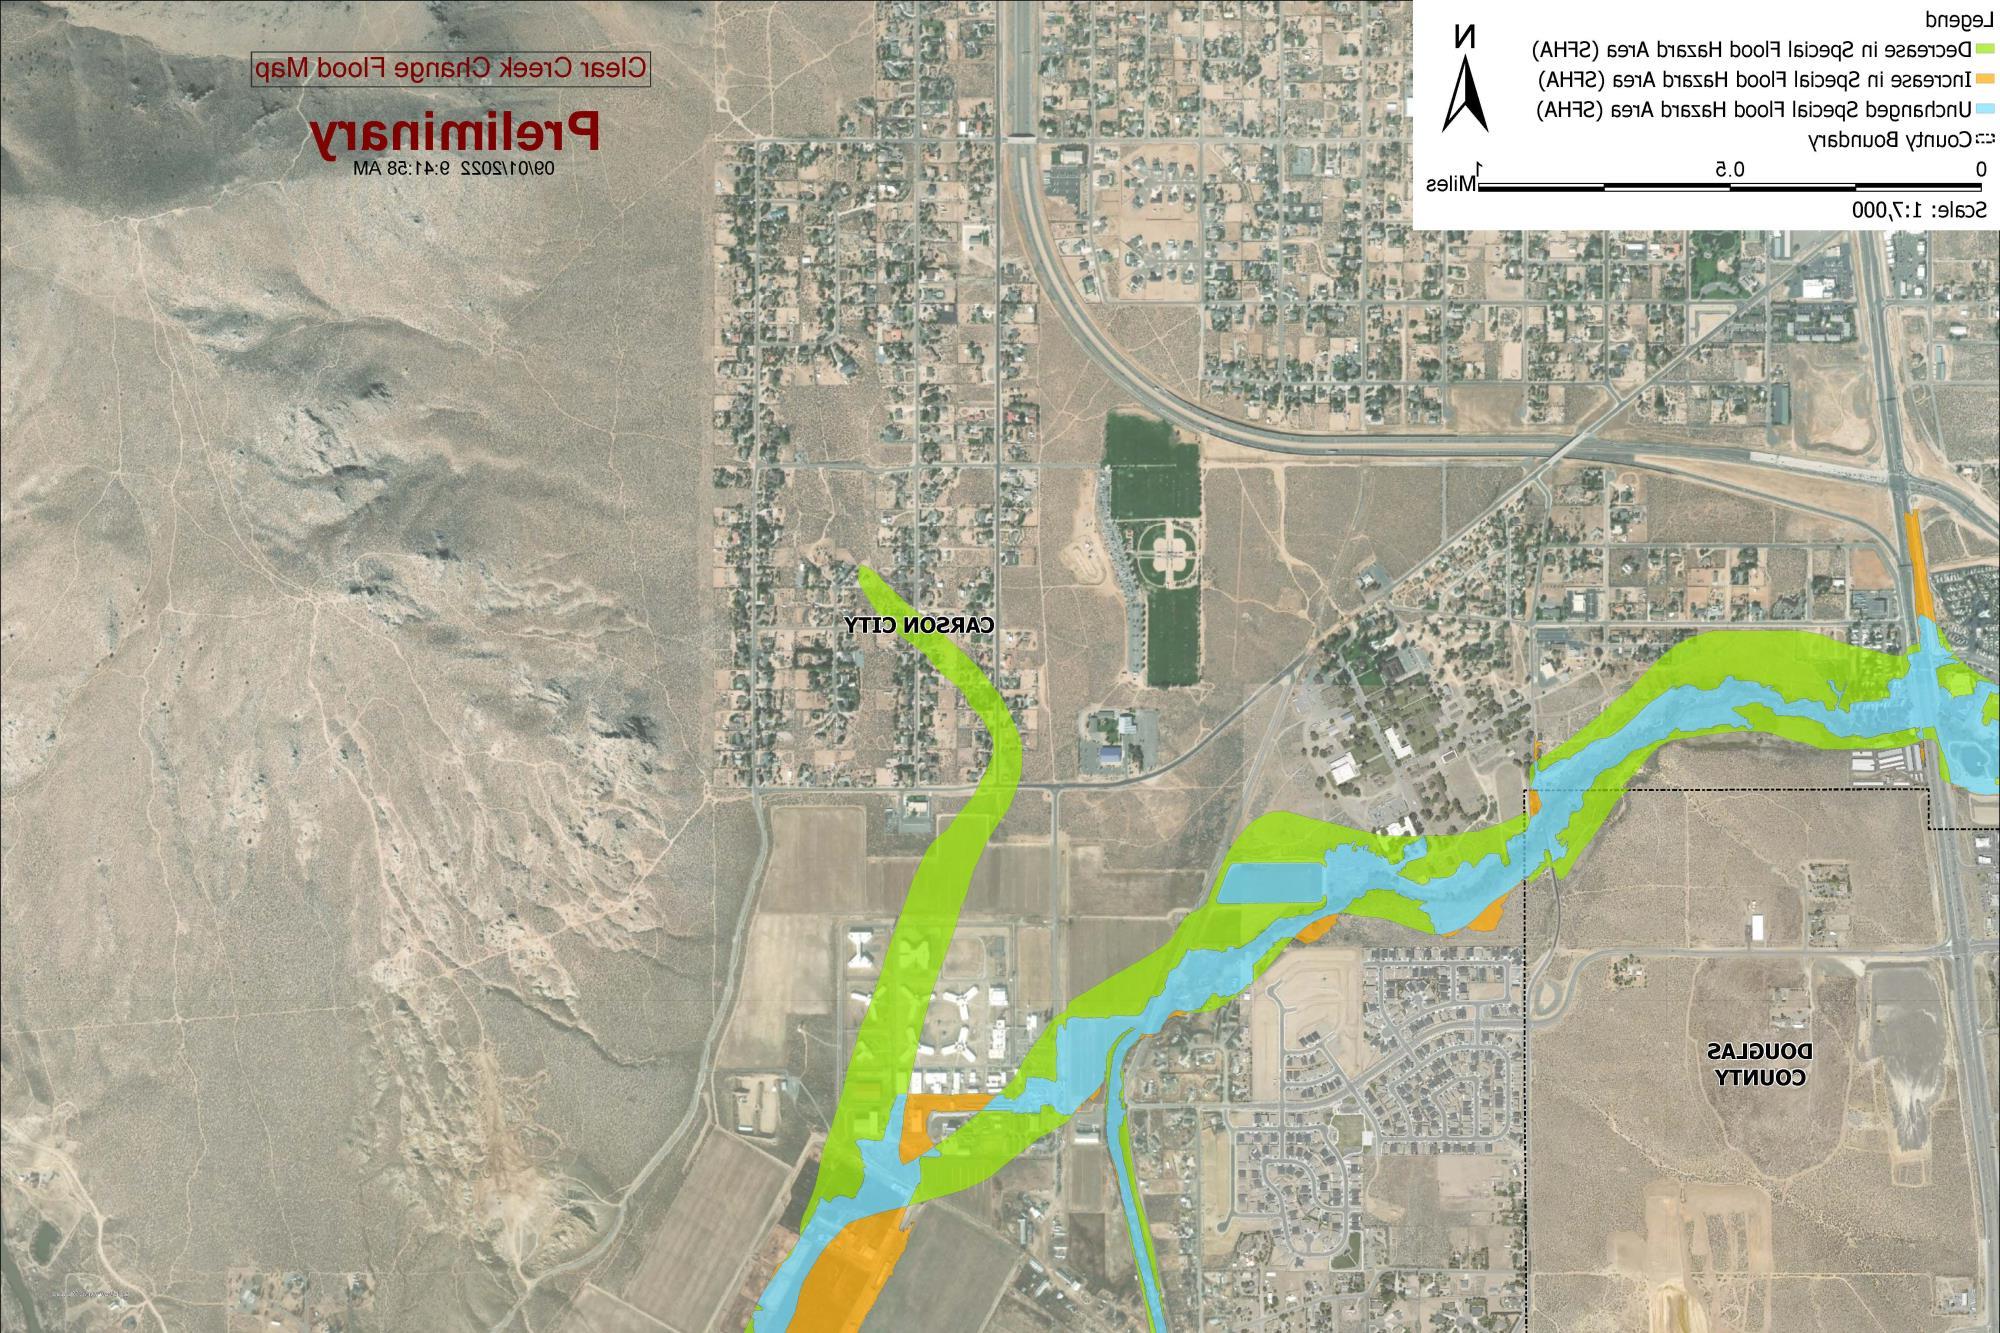 Remap-Restudy-Clear-Creek-Increase-Decrease-Unchanged-SFHA_24x36_Reduced_Page_3